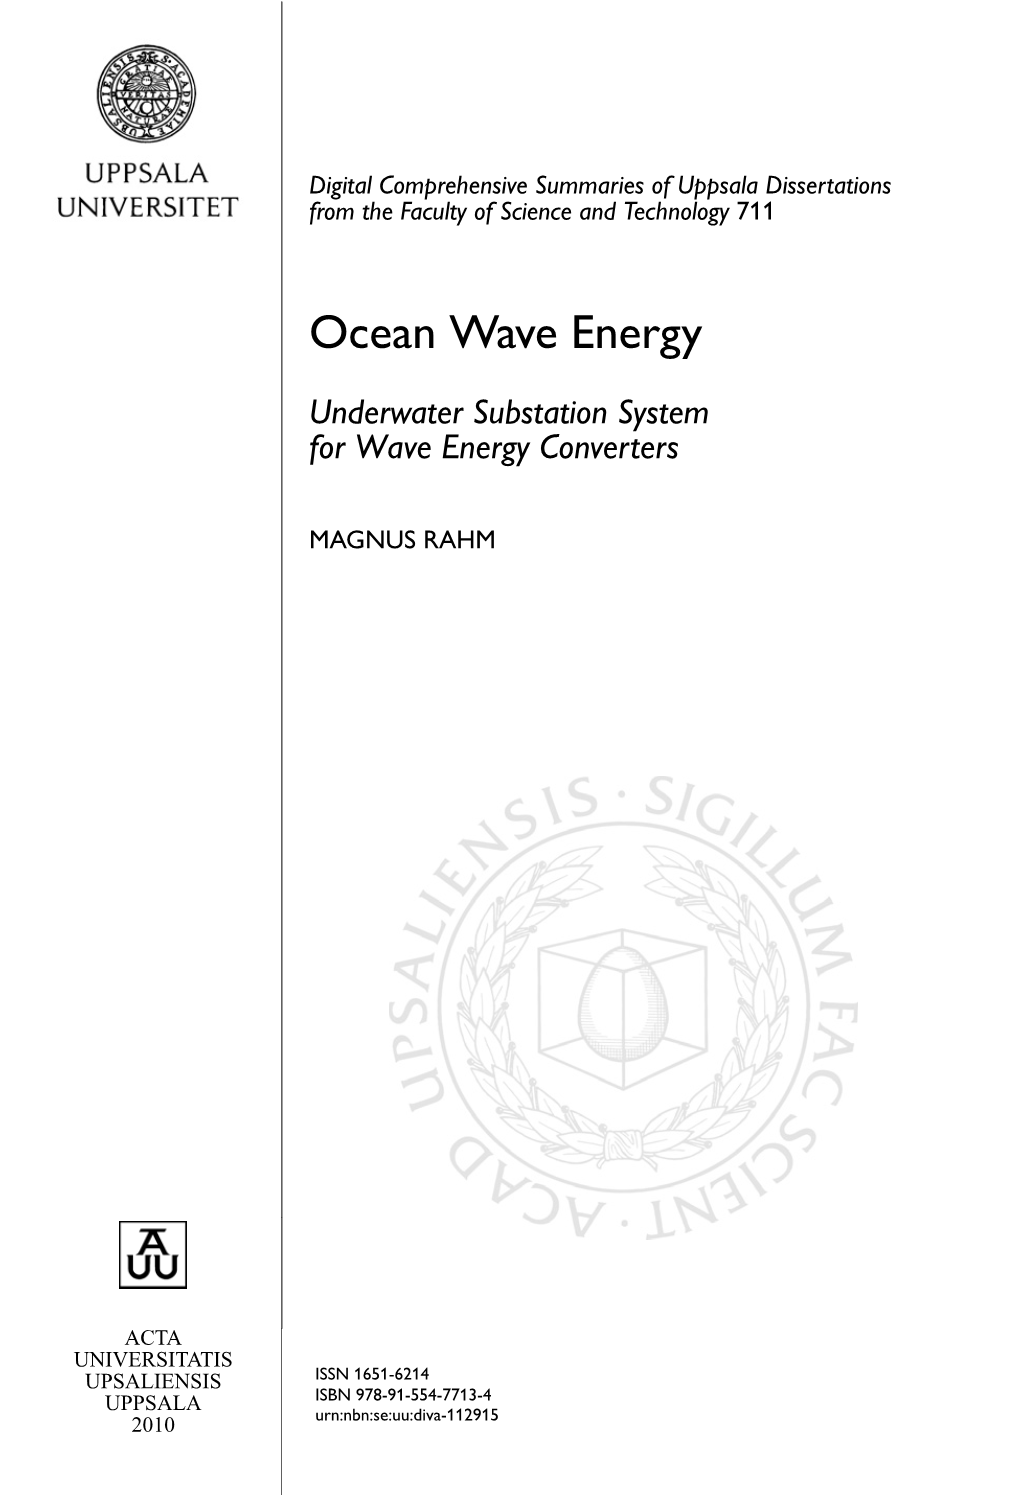 Ocean Wave Energy: Underwater Substation System for Wave Energy